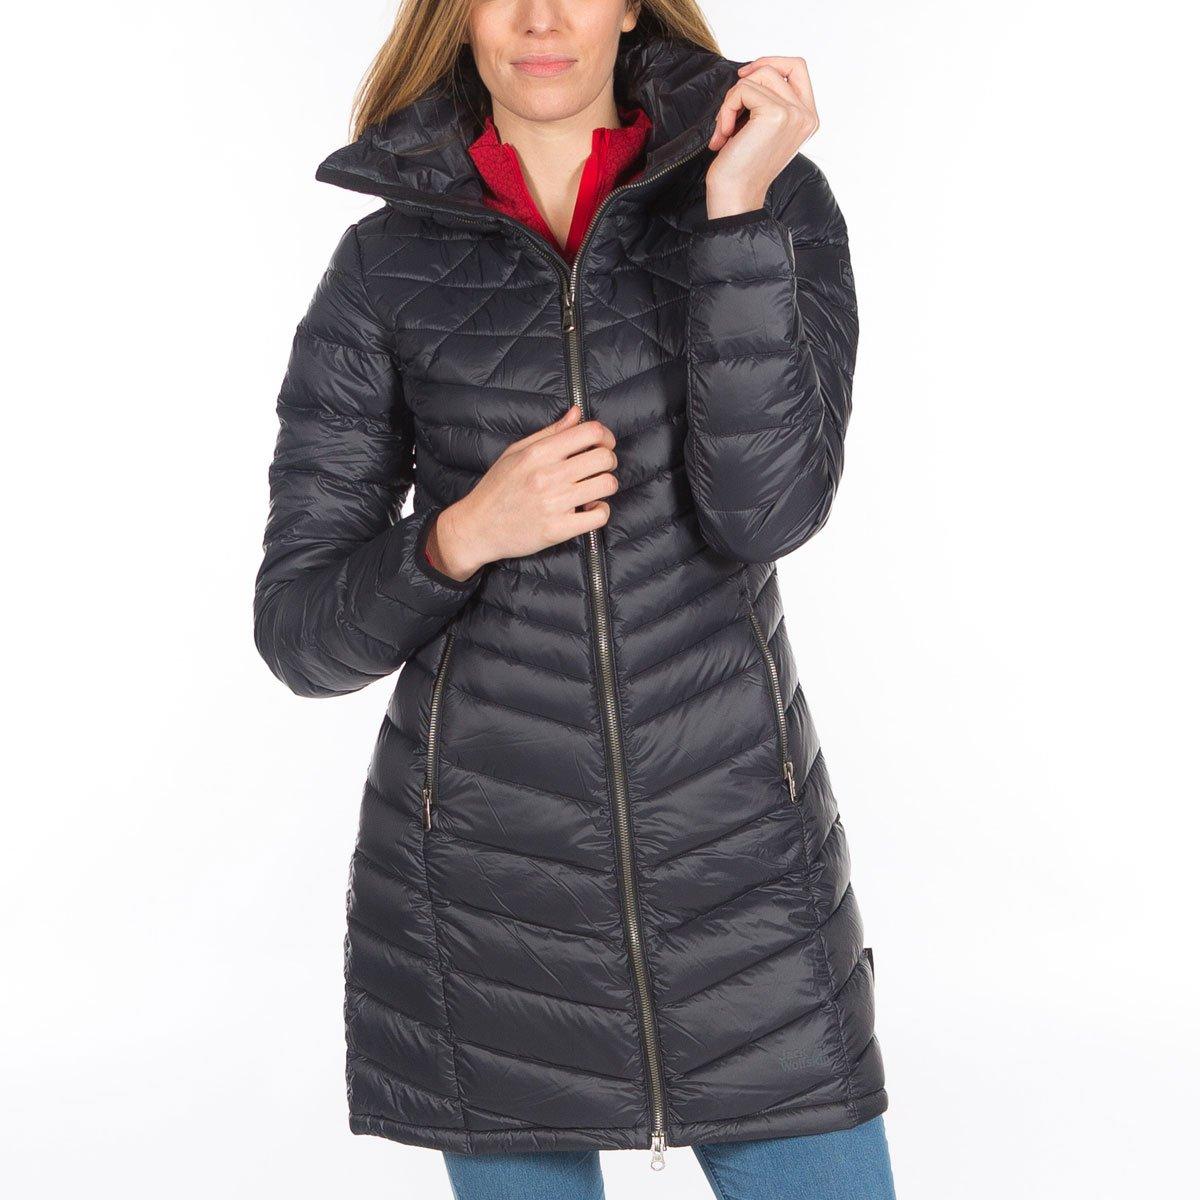 Womens | Outdoor | Clothing | Jackets | Down & Insulation | Page 2